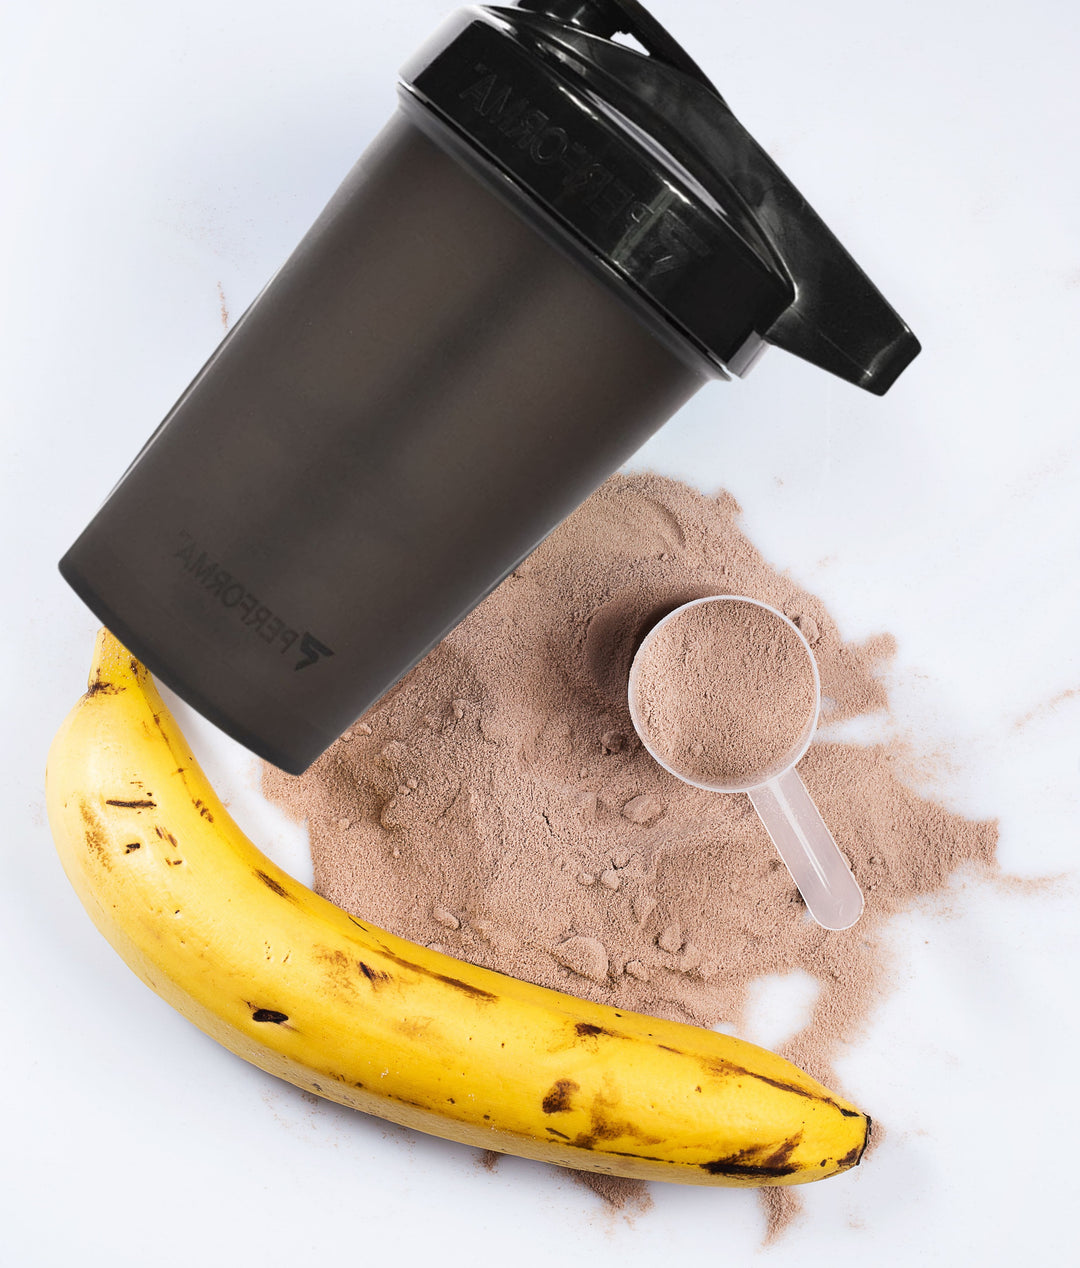 Can you put a banana in a shaker cup?